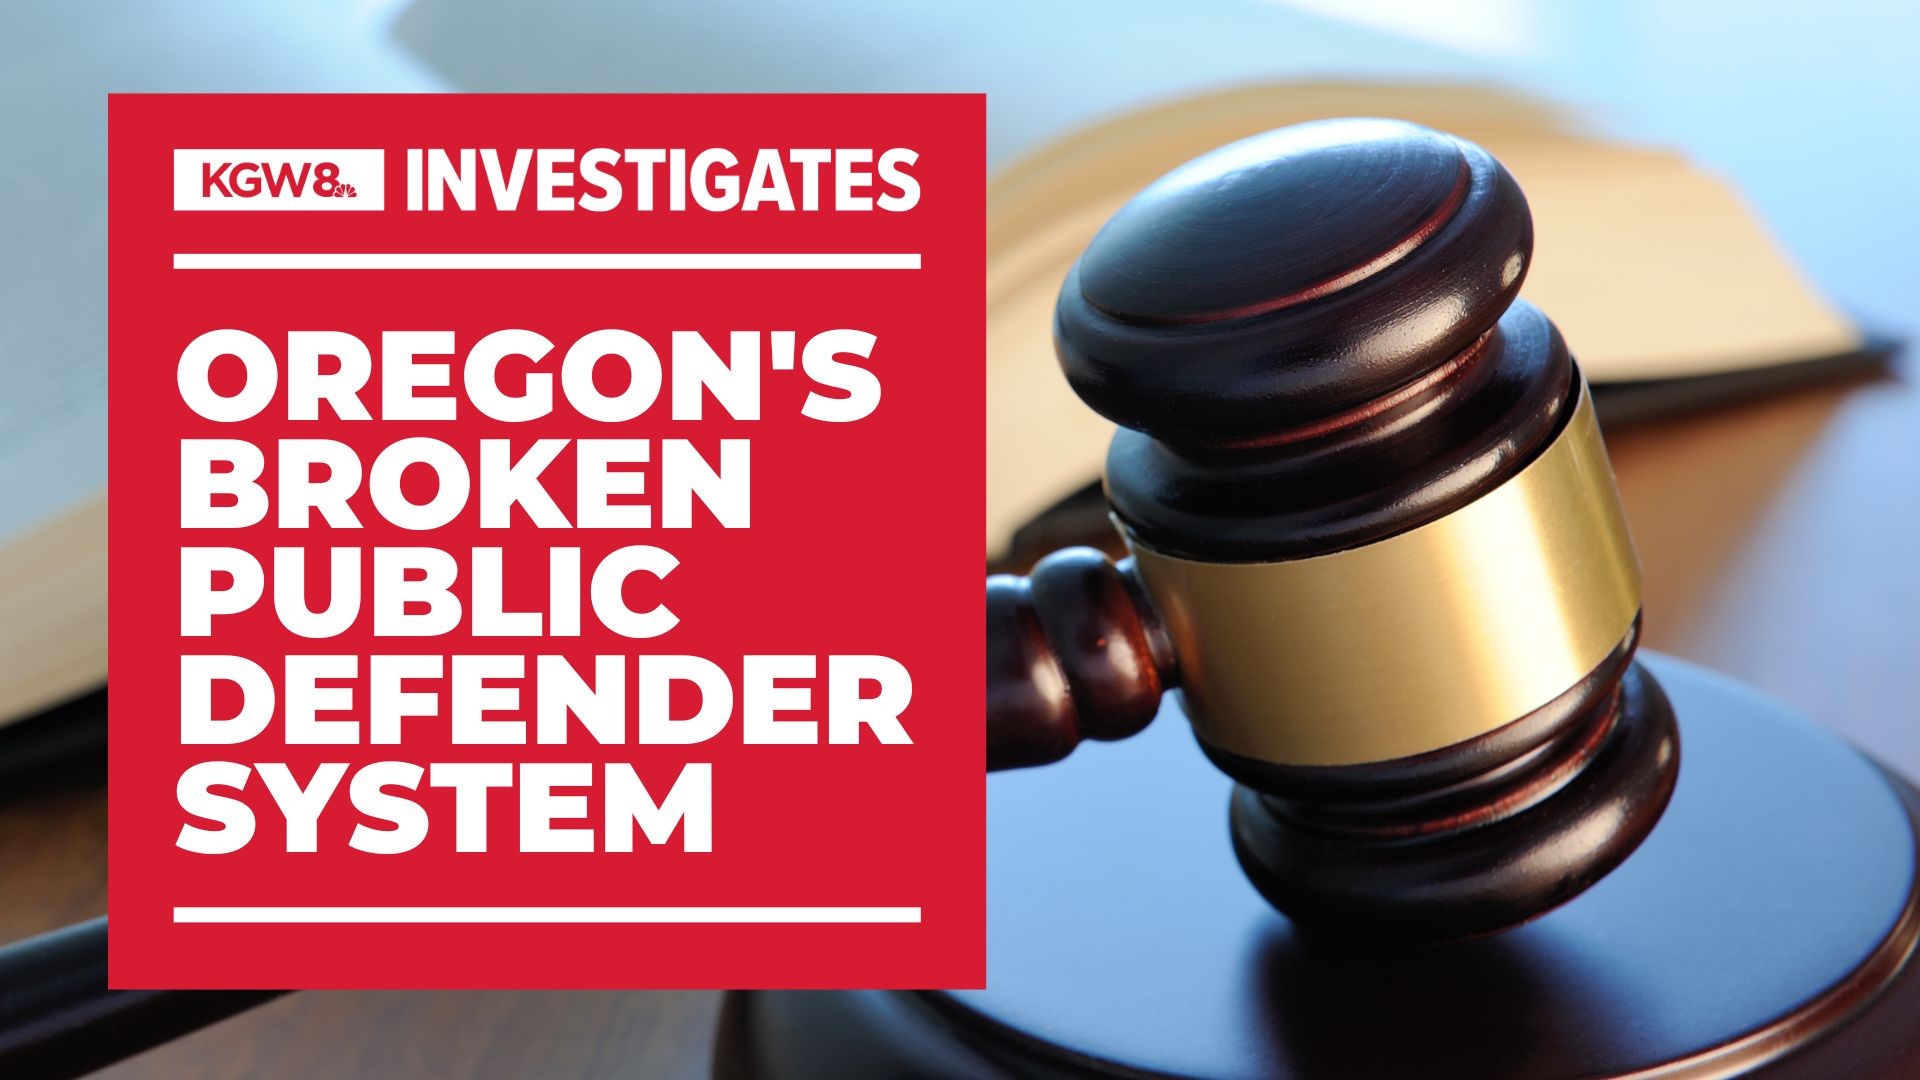 To better understand the statewide crisis, KGW heard from three people directly impacted by the shortage of public defenders.